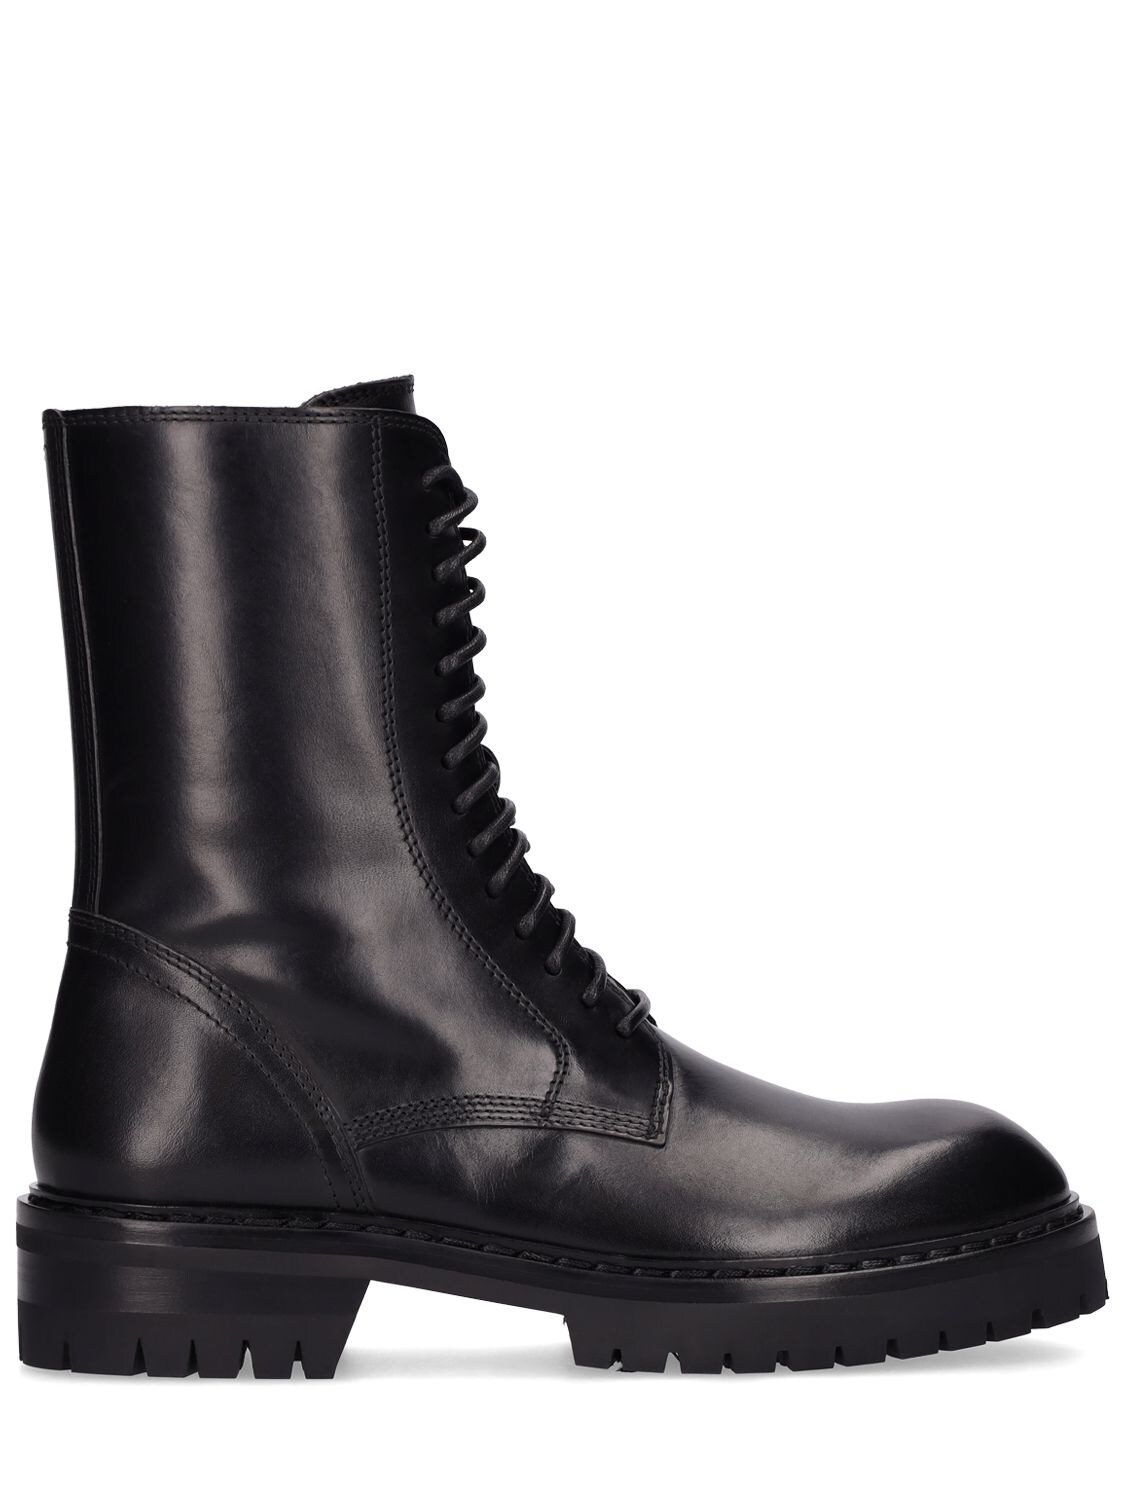 ANN DEMEULEMEESTER 30MM ALEC LEATHER ANKLE BOOTS